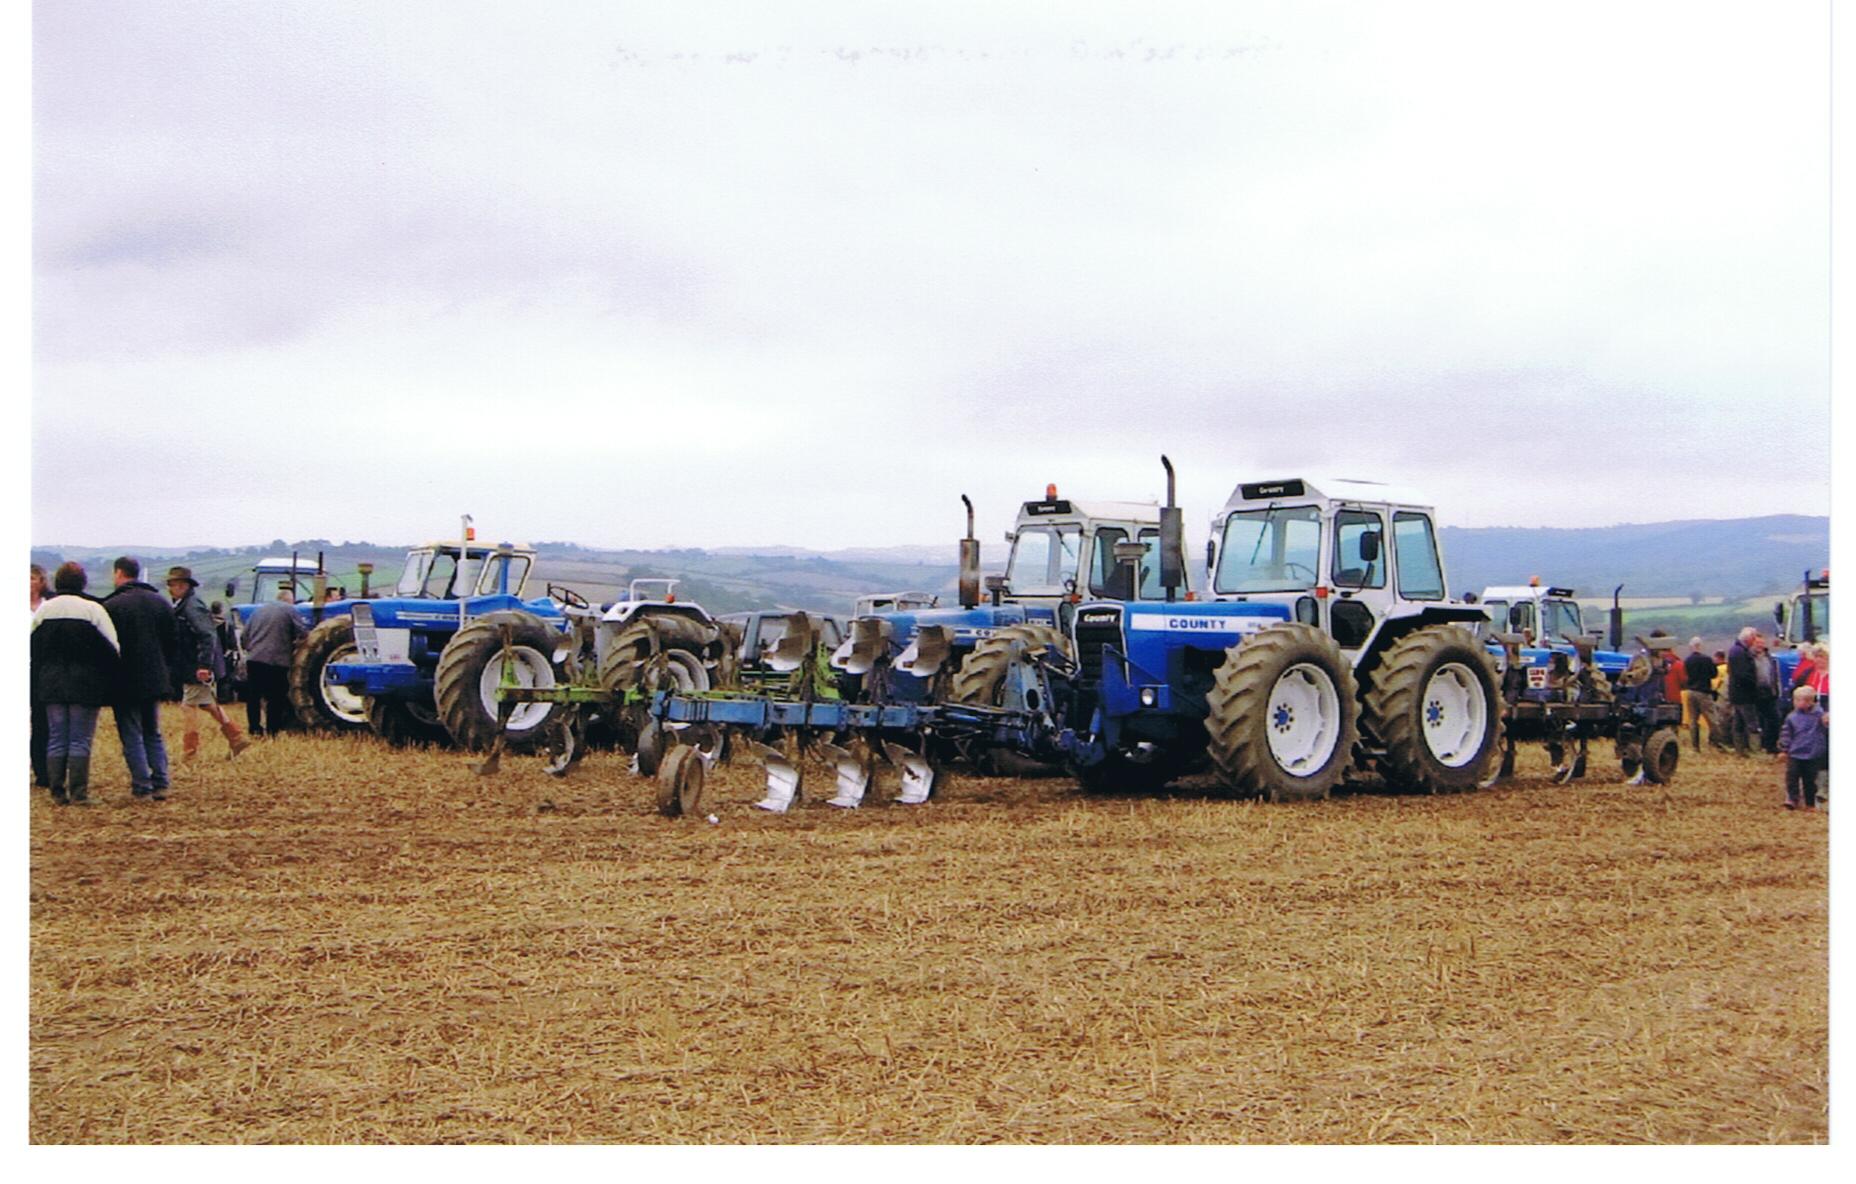 County Commercial tractors on show